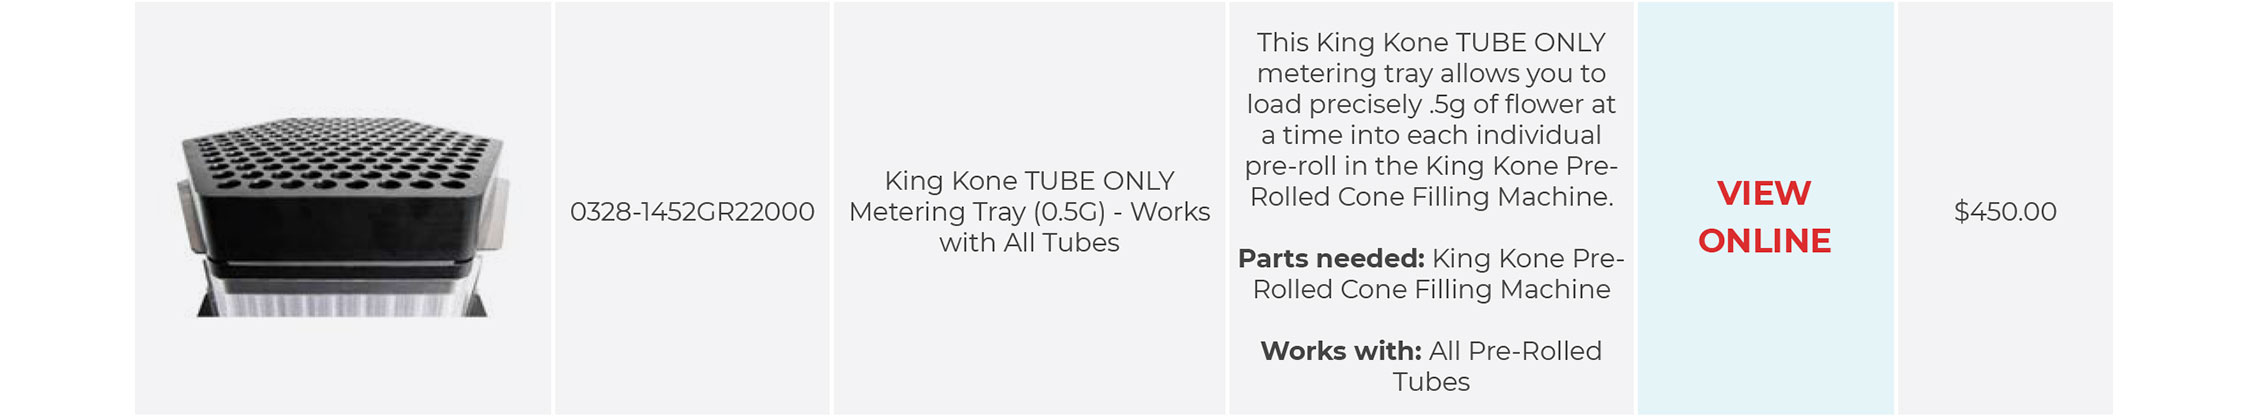 King Kone TUBE ONLY Metering Tray (0.5G) - Works with All Tubes